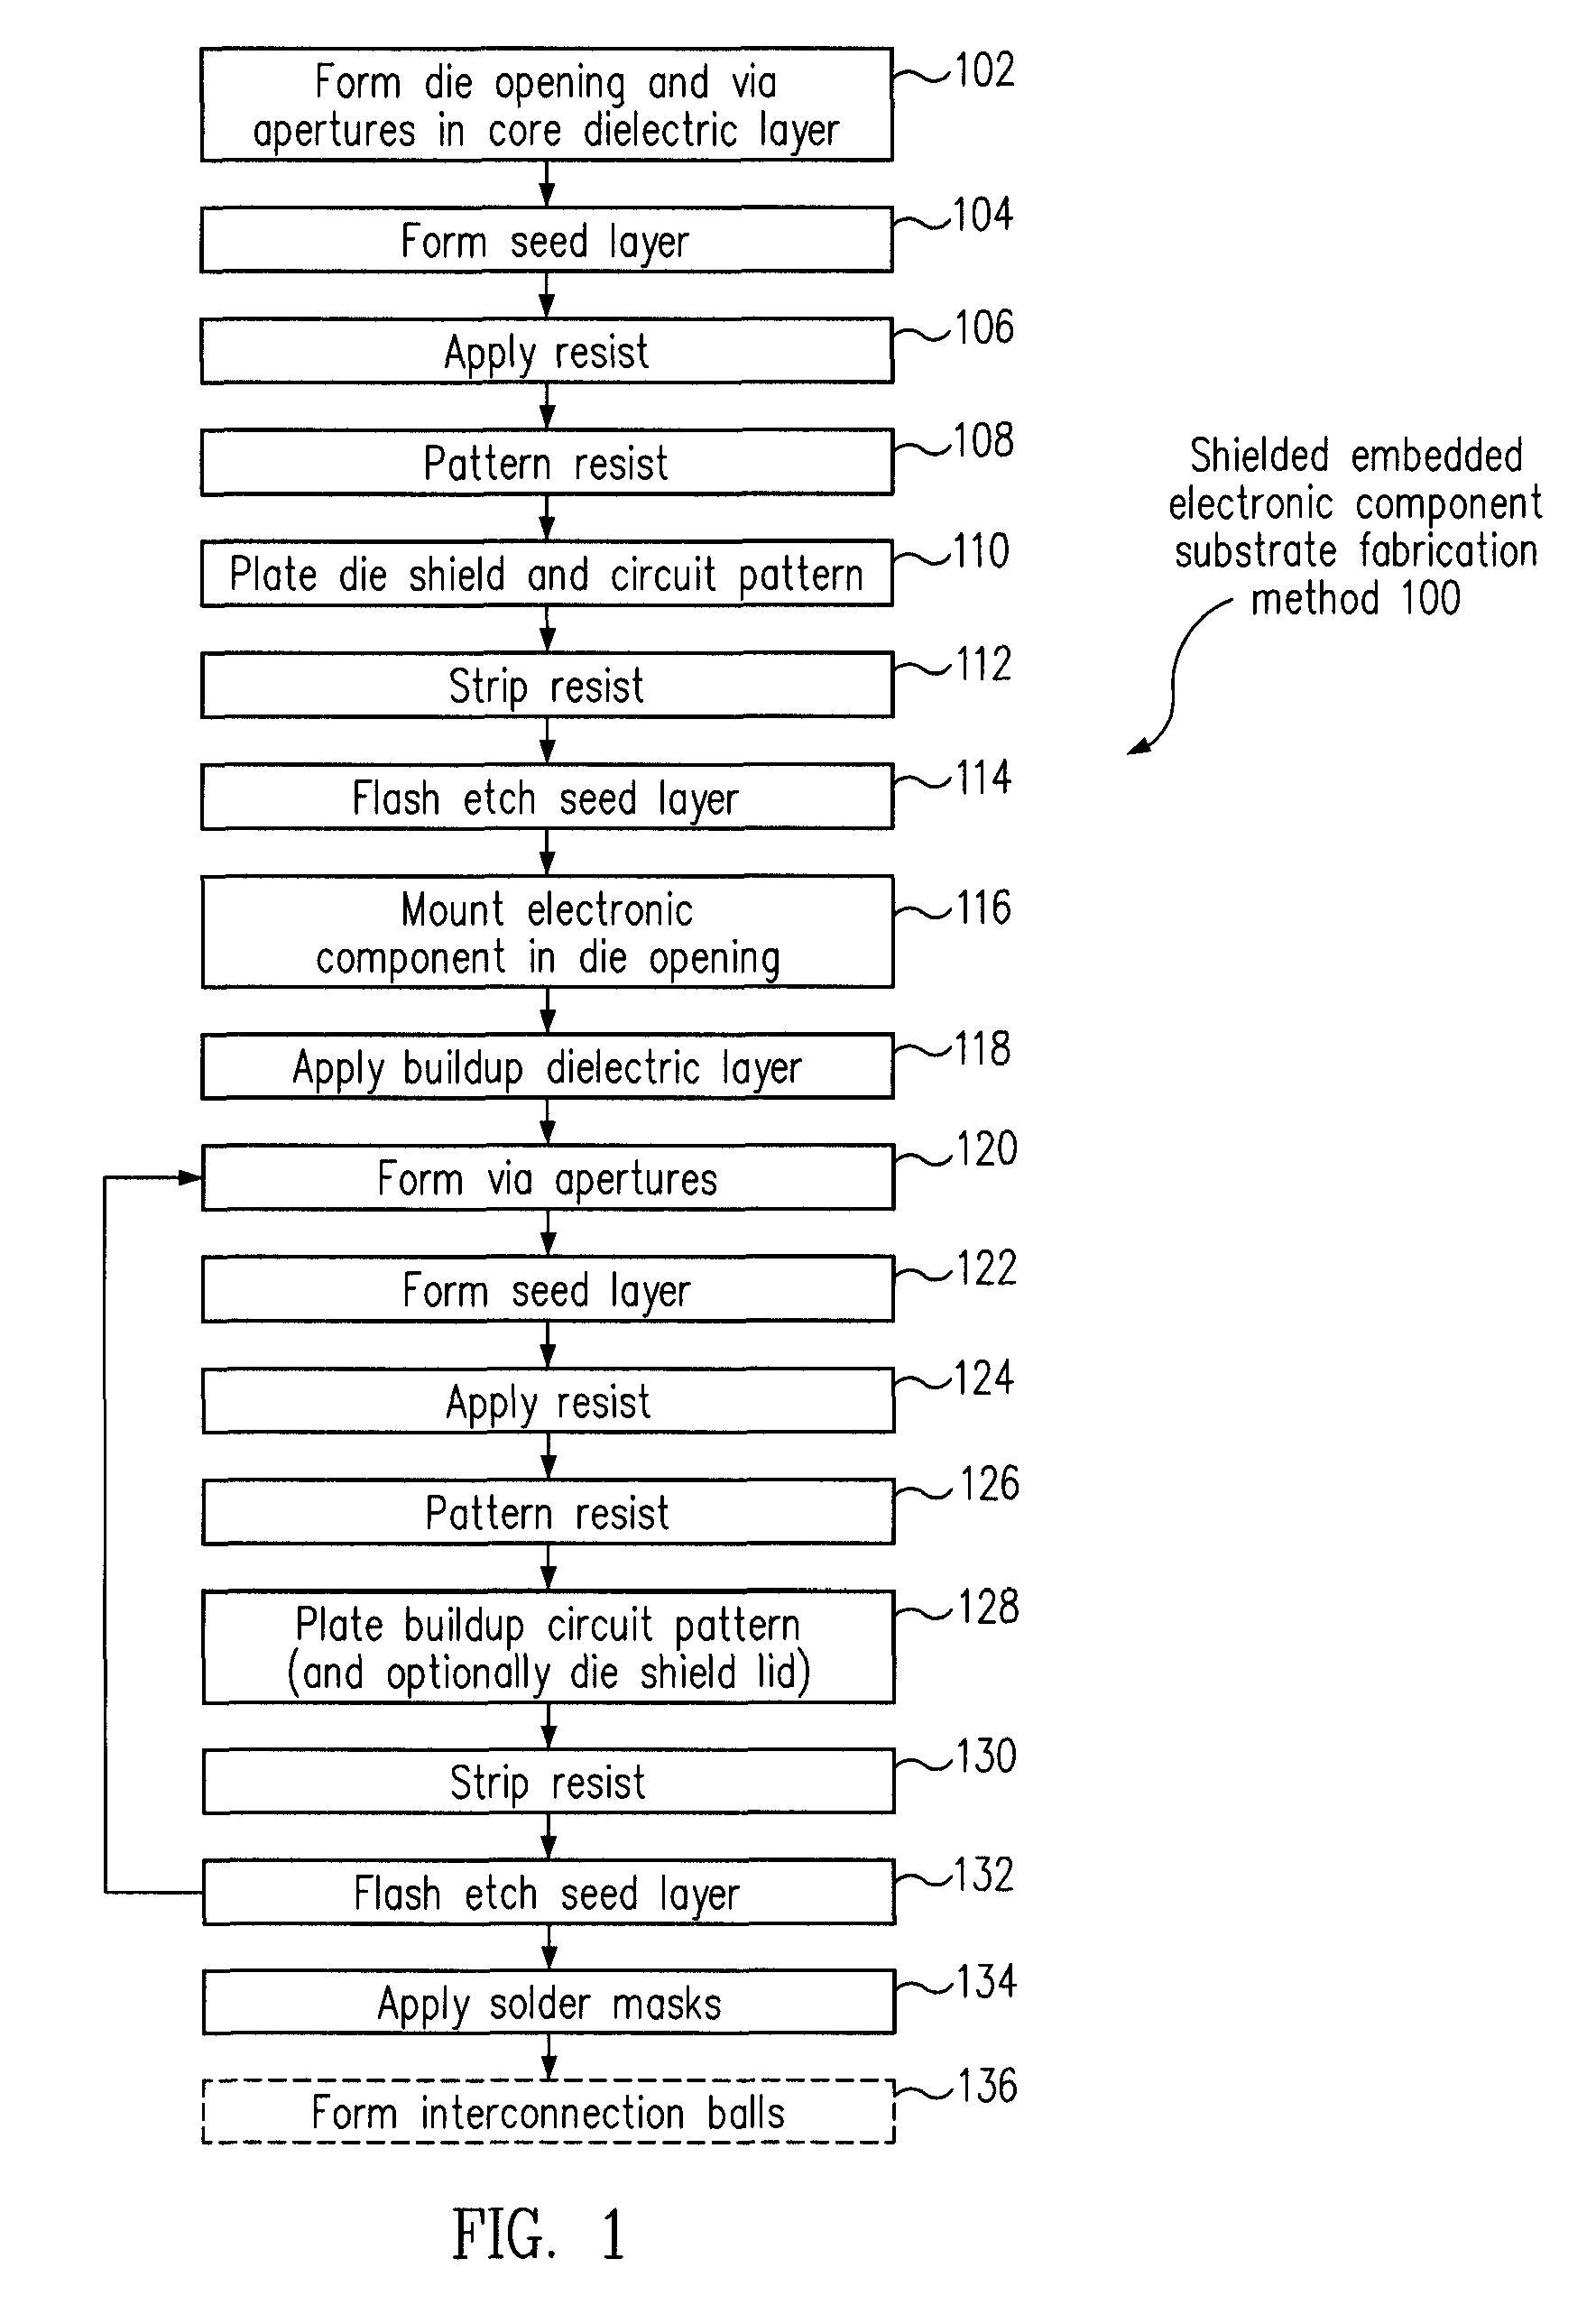 Shielded embedded electronic component substrate fabrication method and structure